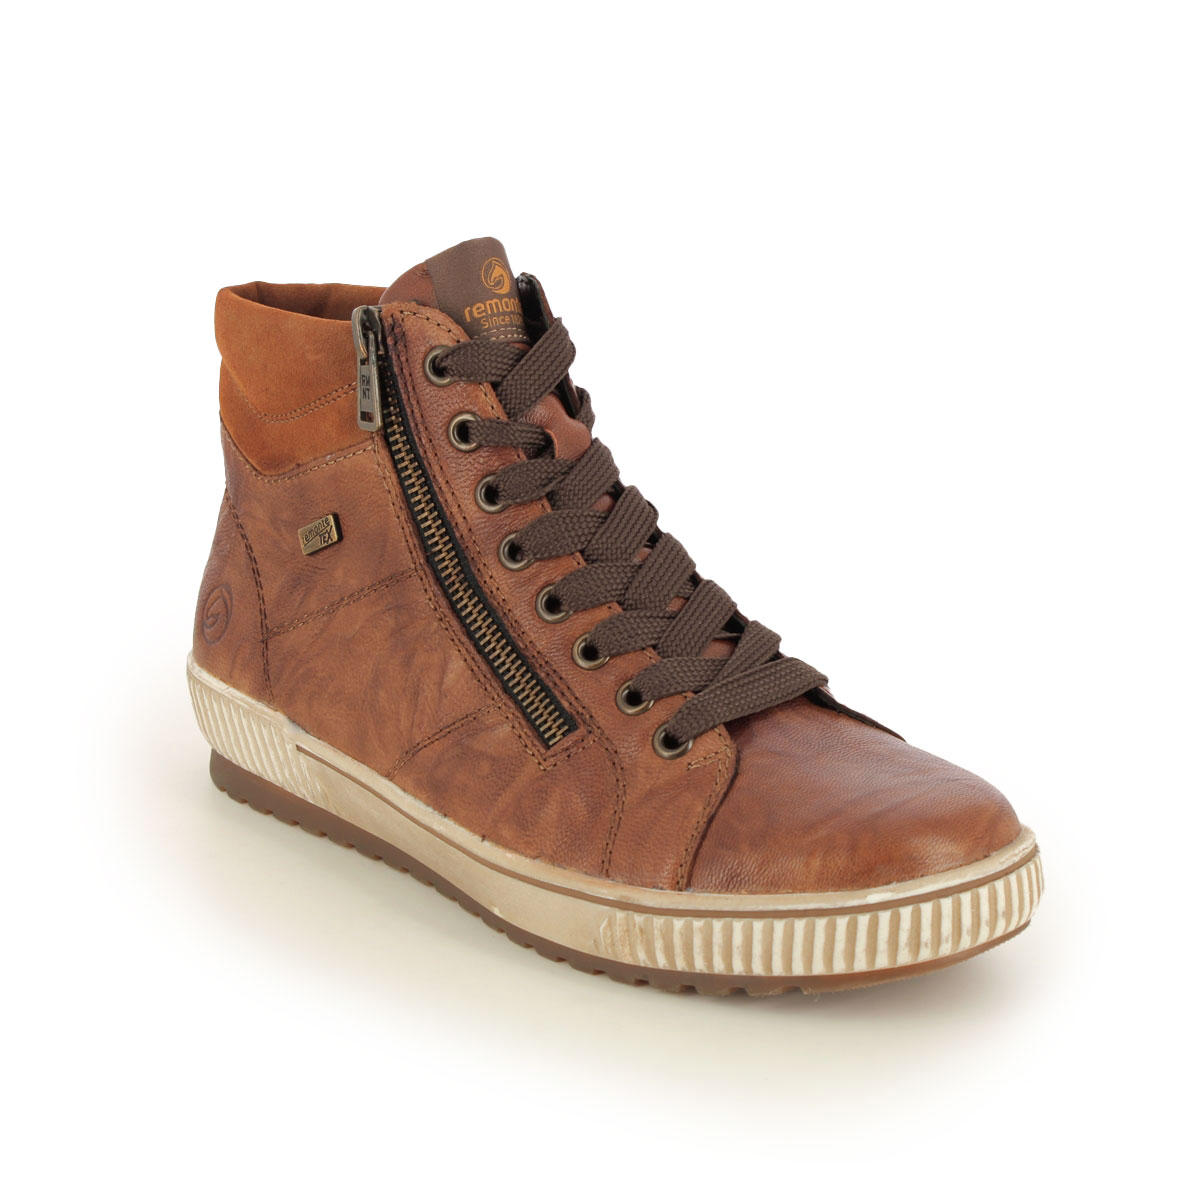 Remonte Tanaloto Tex Tan Leather  Womens Hi Tops D0772-22 In Size 42 In Plain Tan Leather